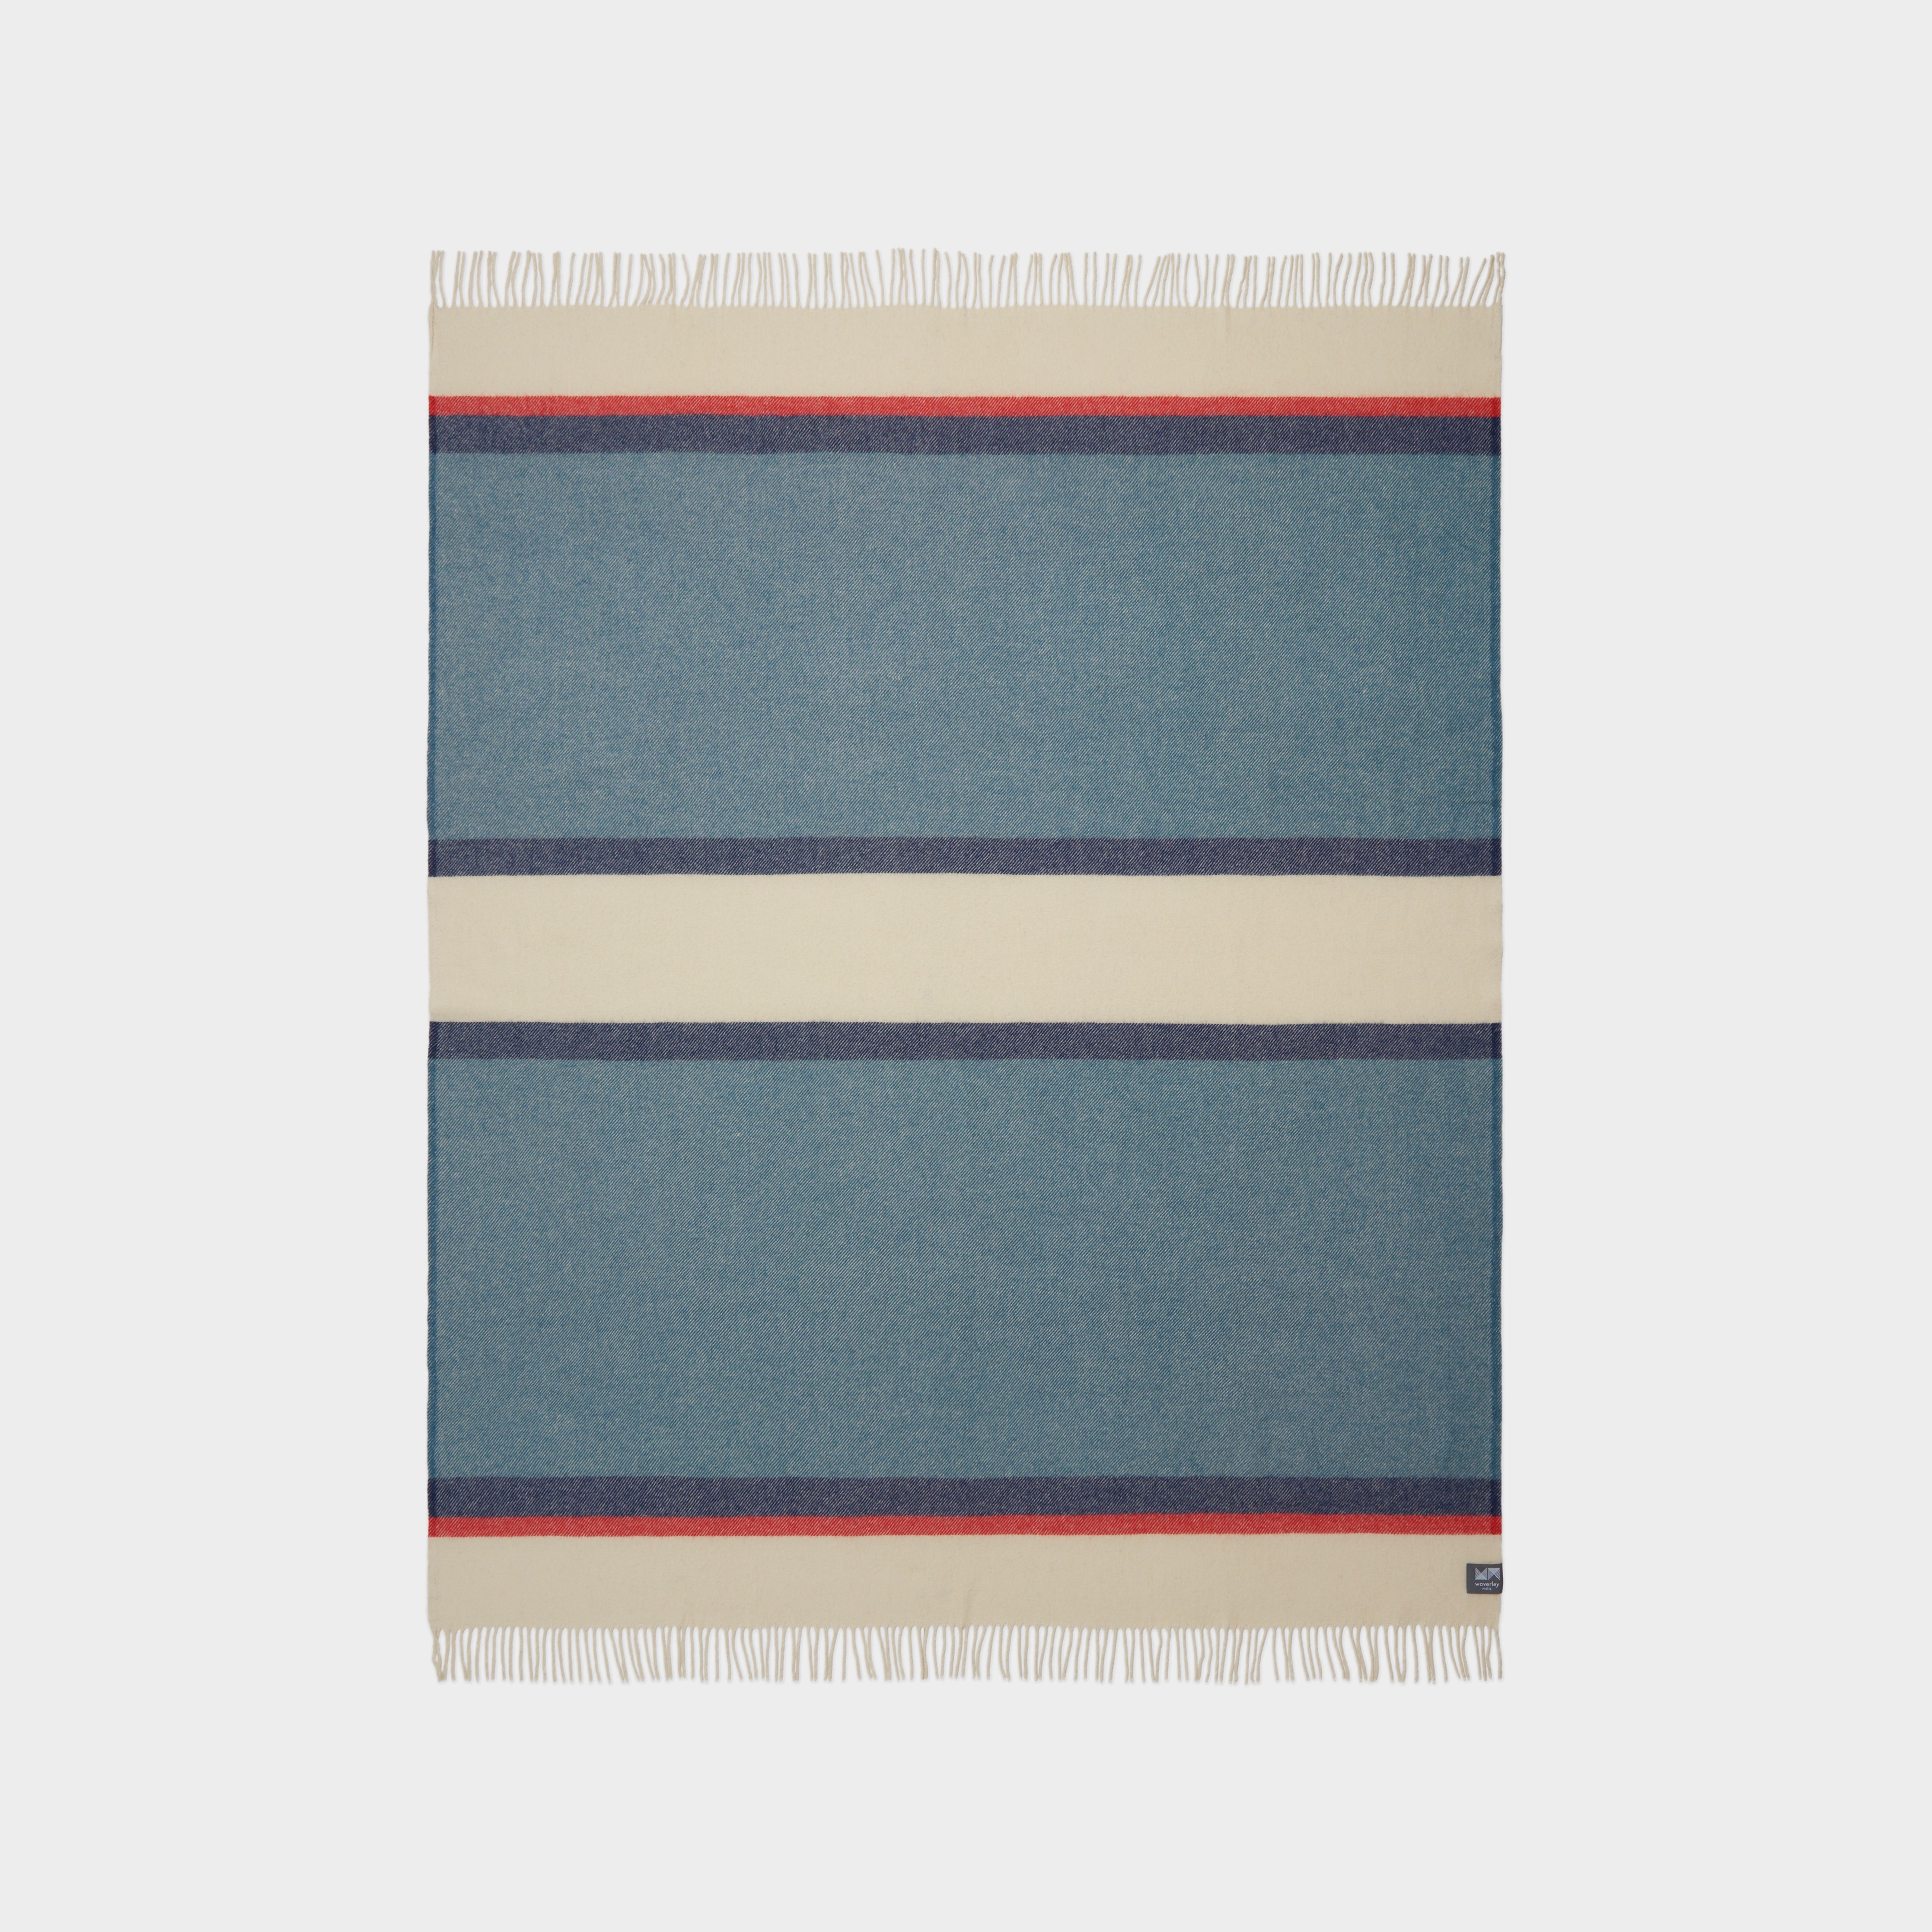 Full view of Riviera Throw in Mari, showing pattern of stripes of blue, natural, and red.